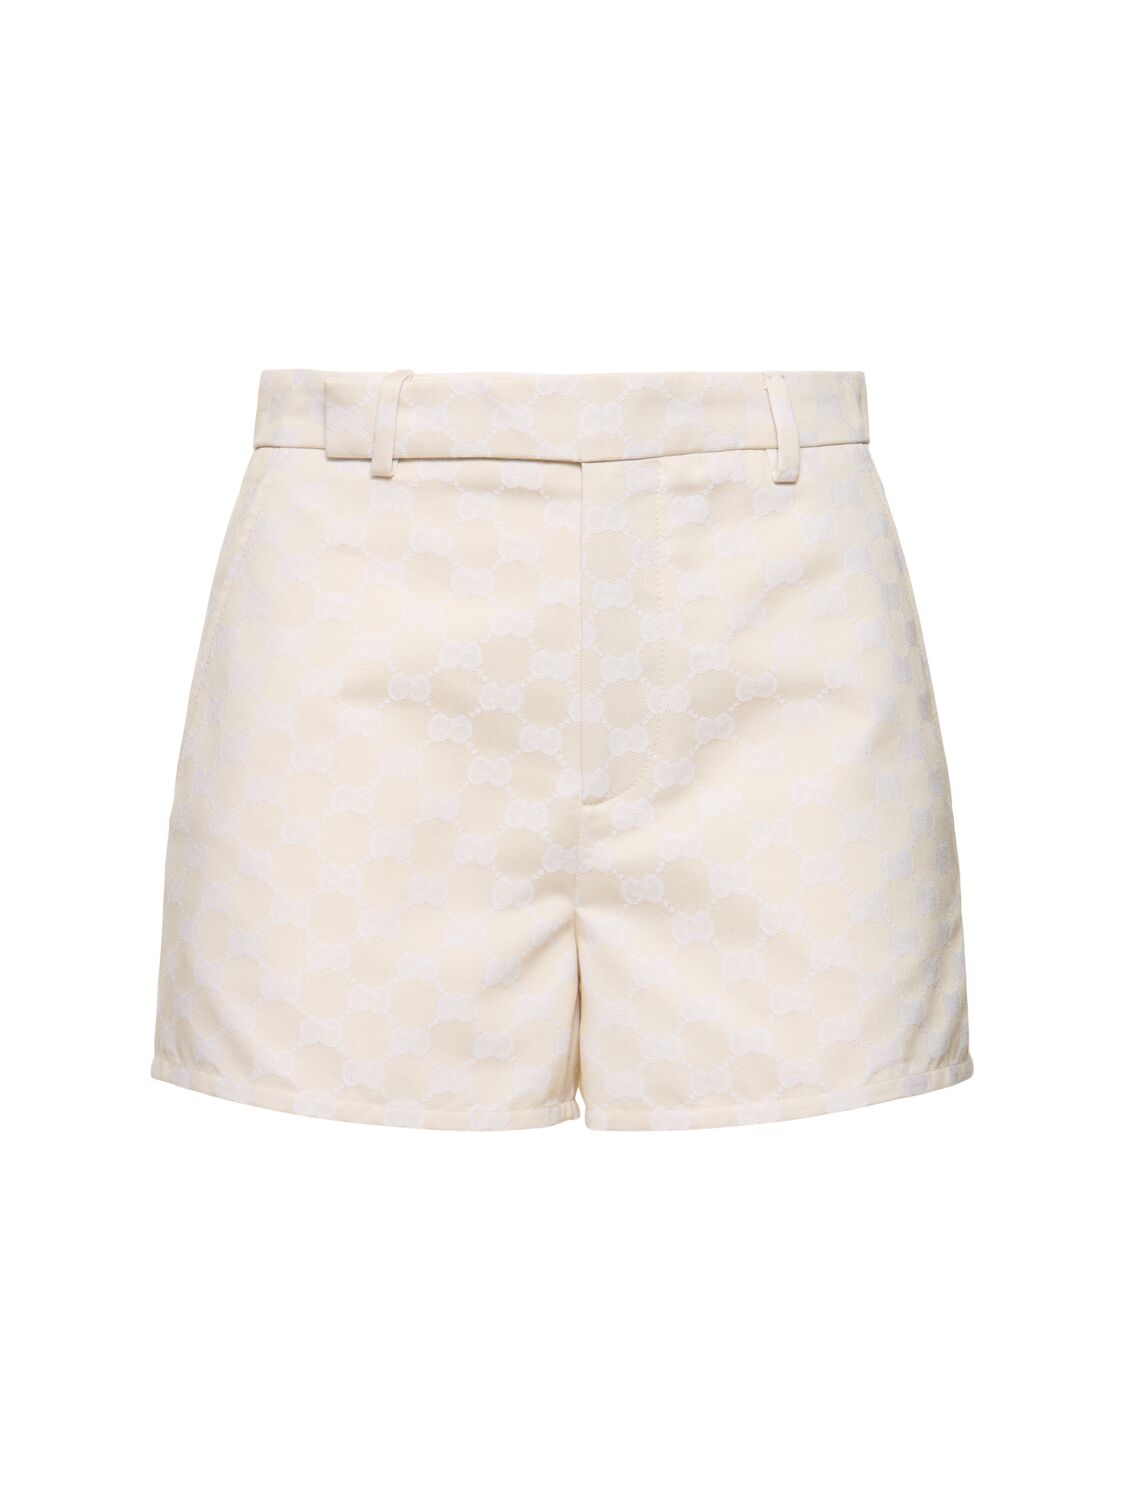 Gucci Gg Cotton Blend Shorts In Salty Sand